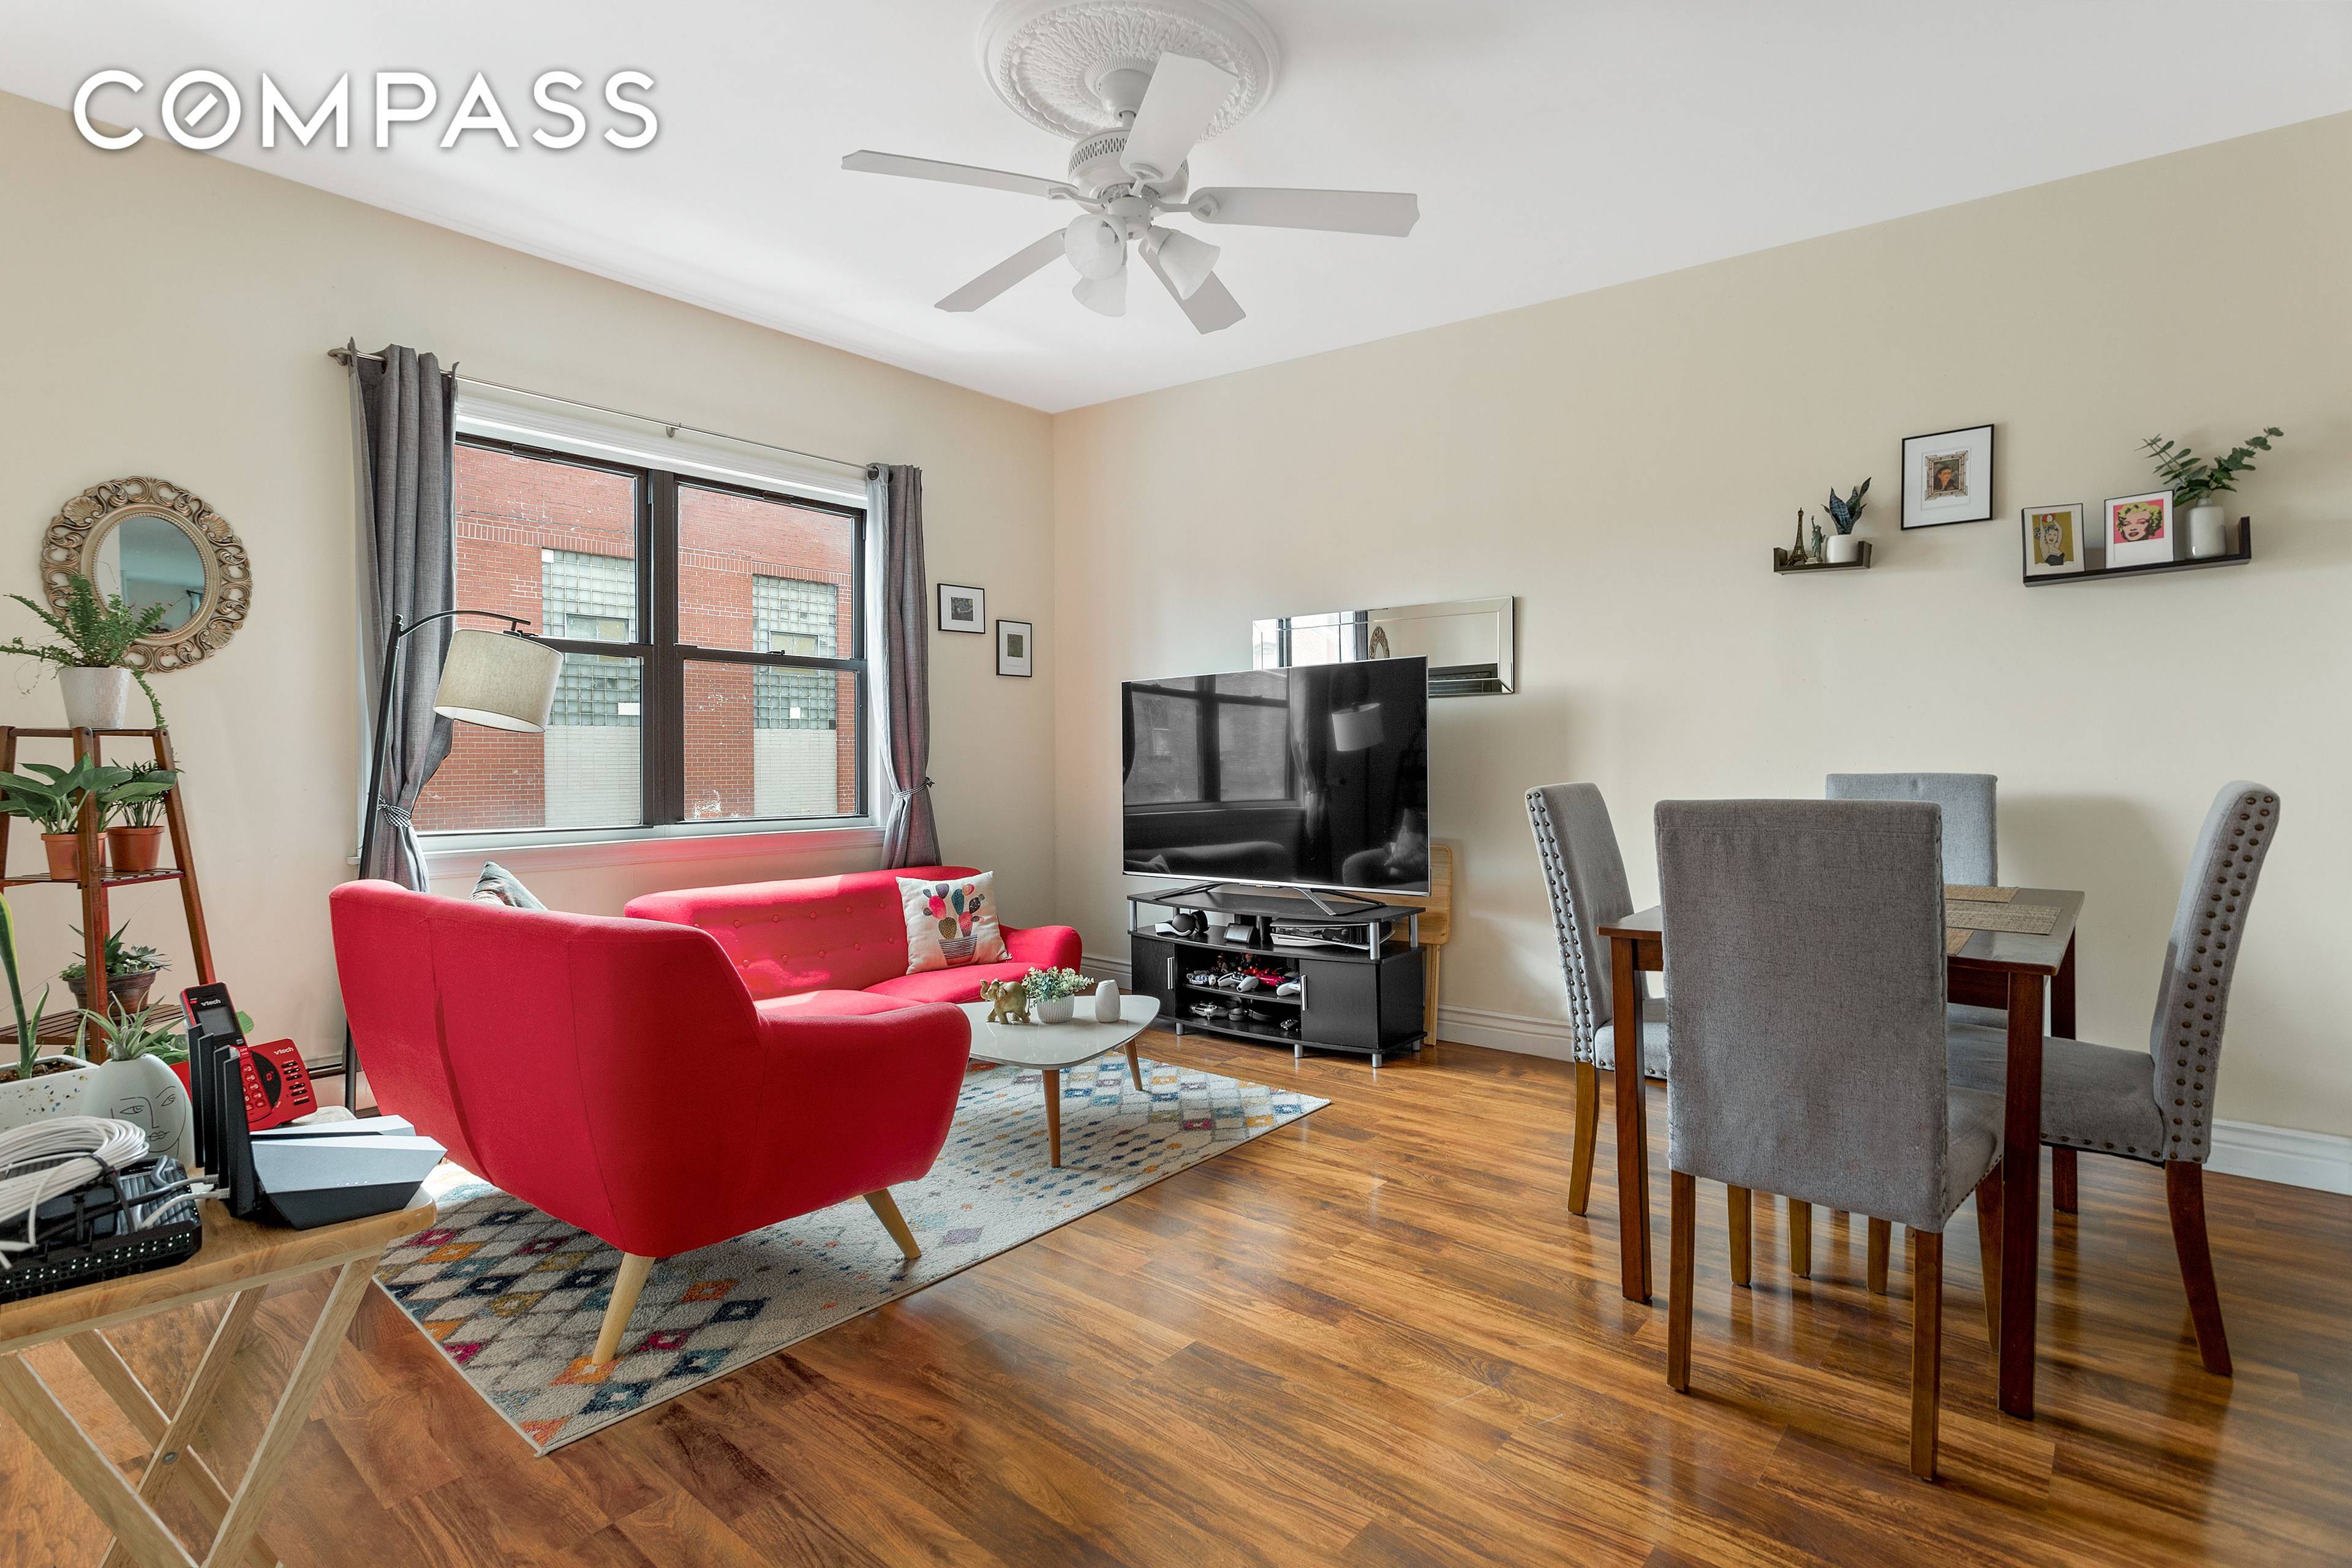 This two family home is located on a corner lot on the border of Boerum Hill and Gowanus.